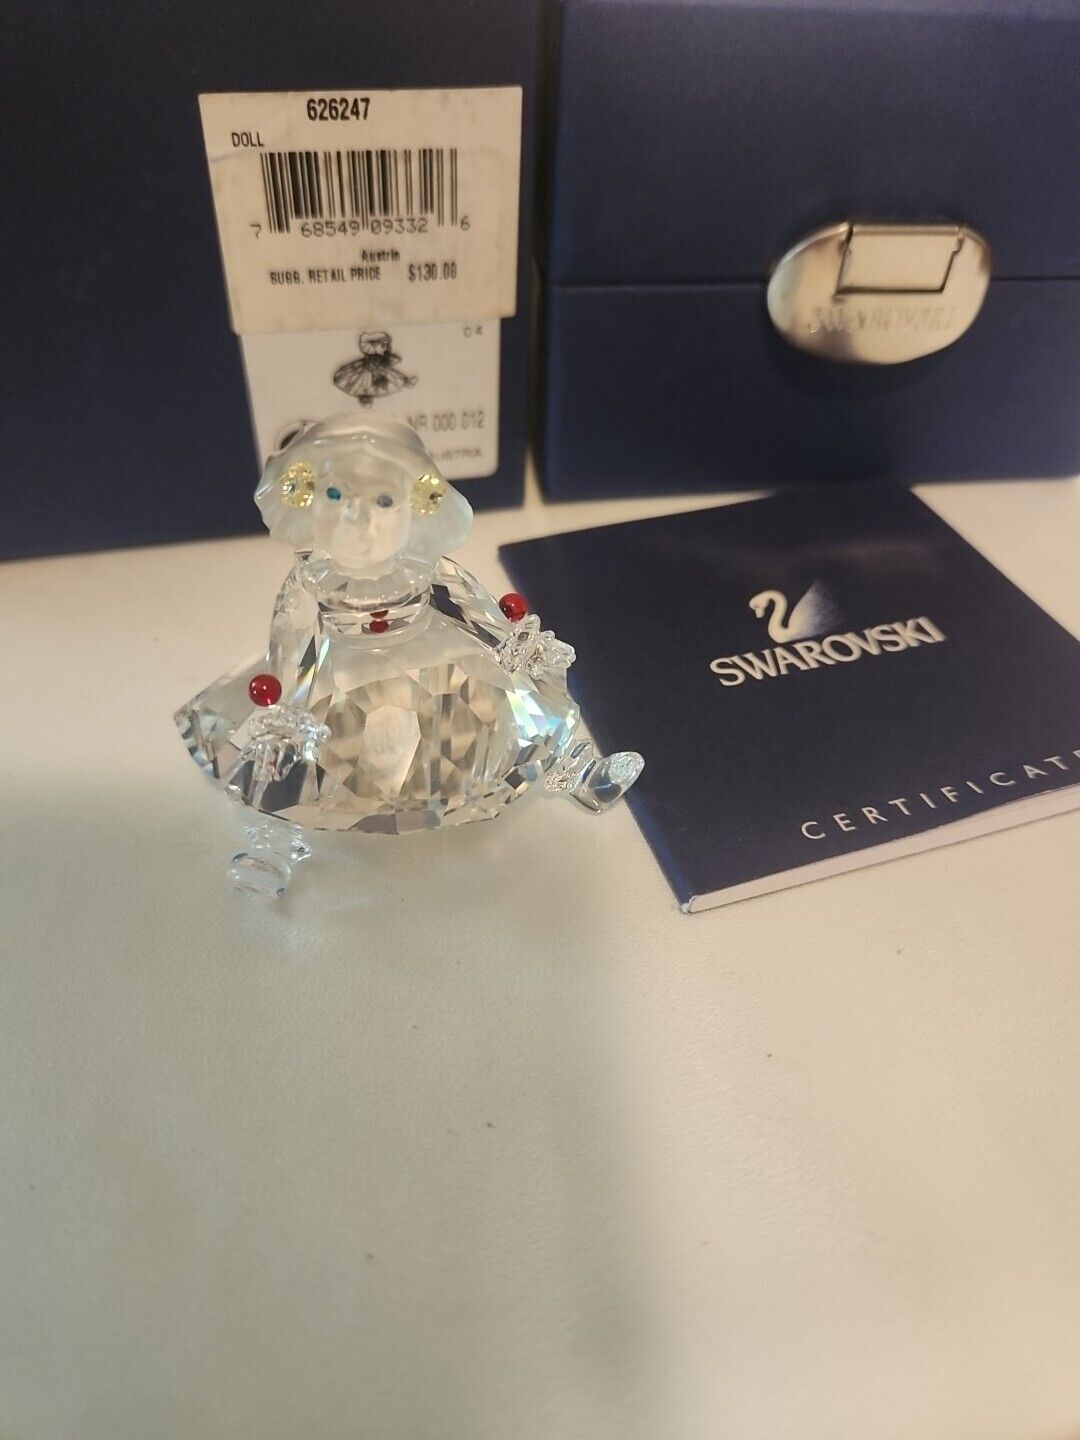 Swarovski Silver Crystal Doll 7550 000 012 With Box And Certificate 